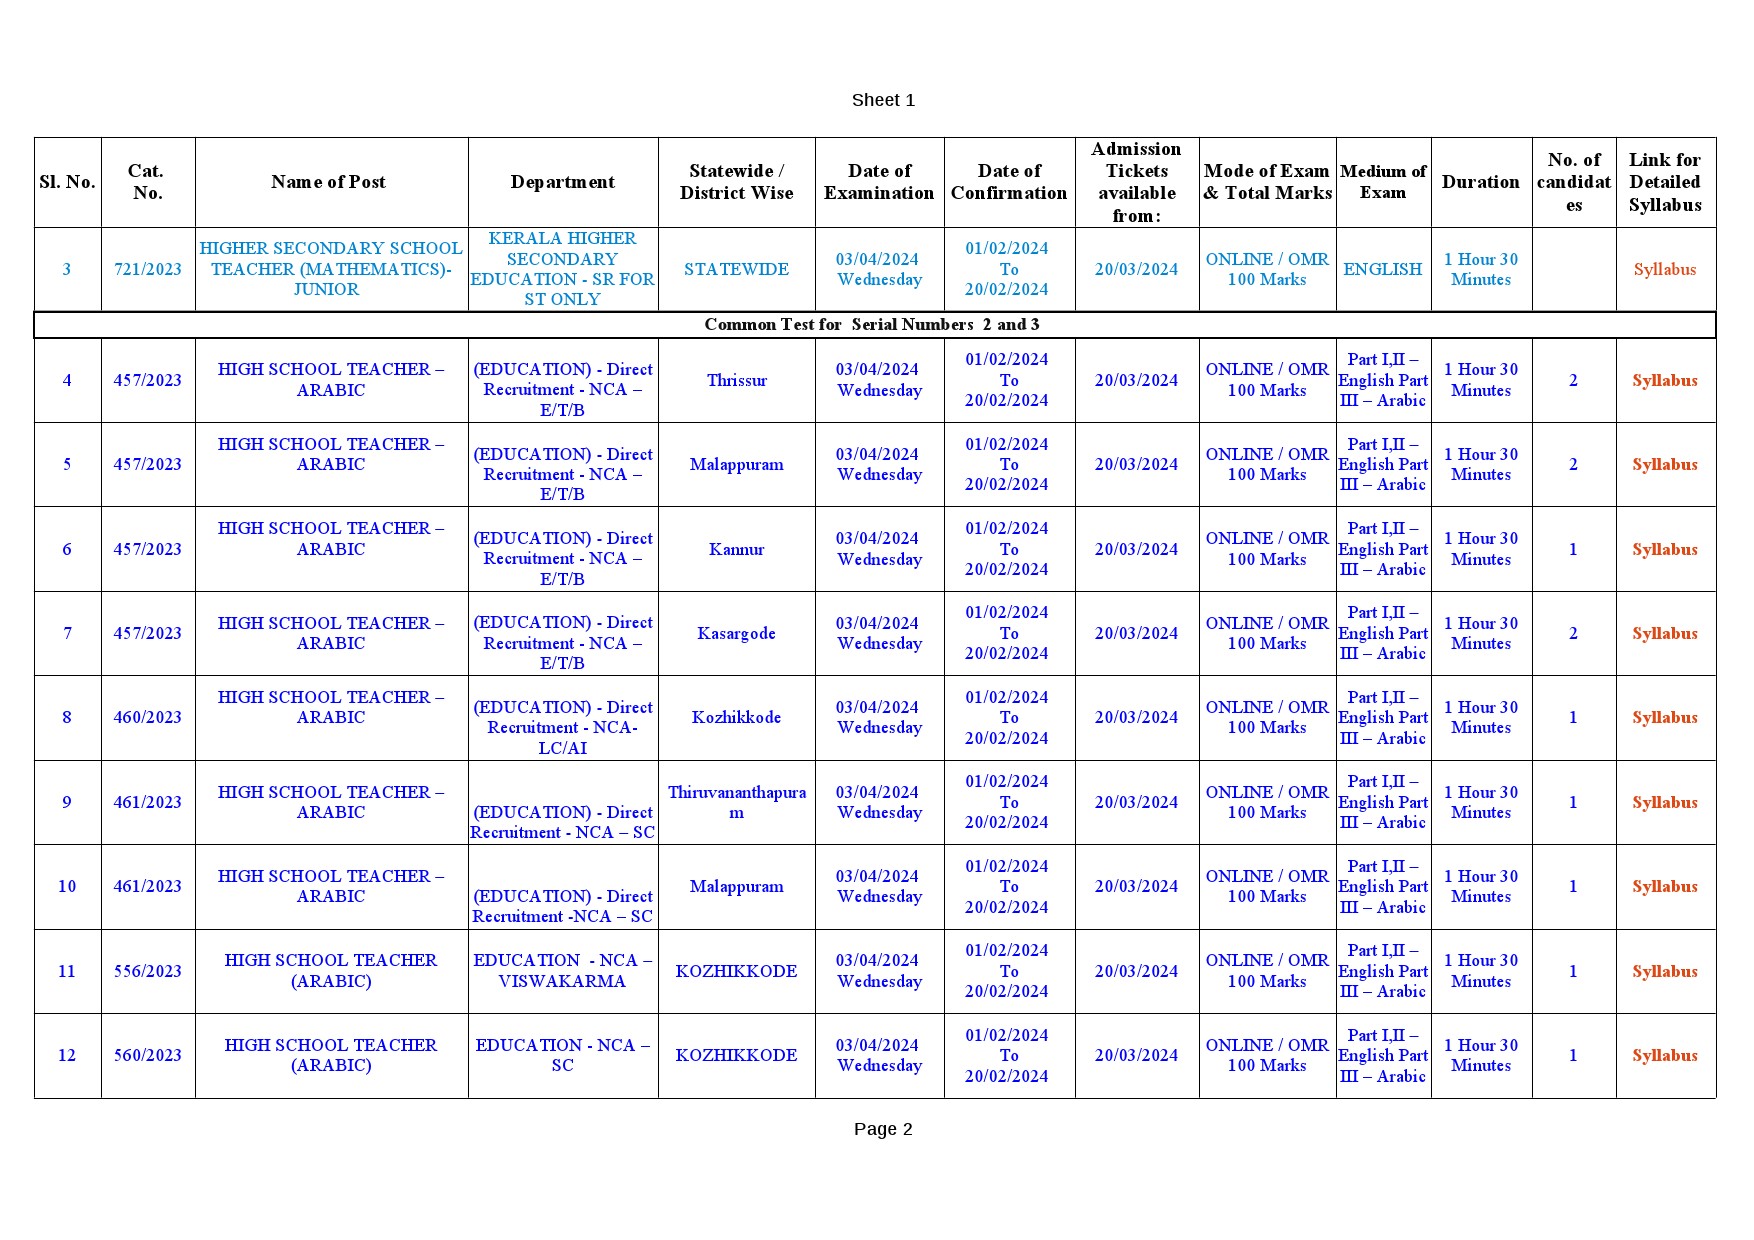 Examination Programme For The Month Of April 2024 - Notification Image 2